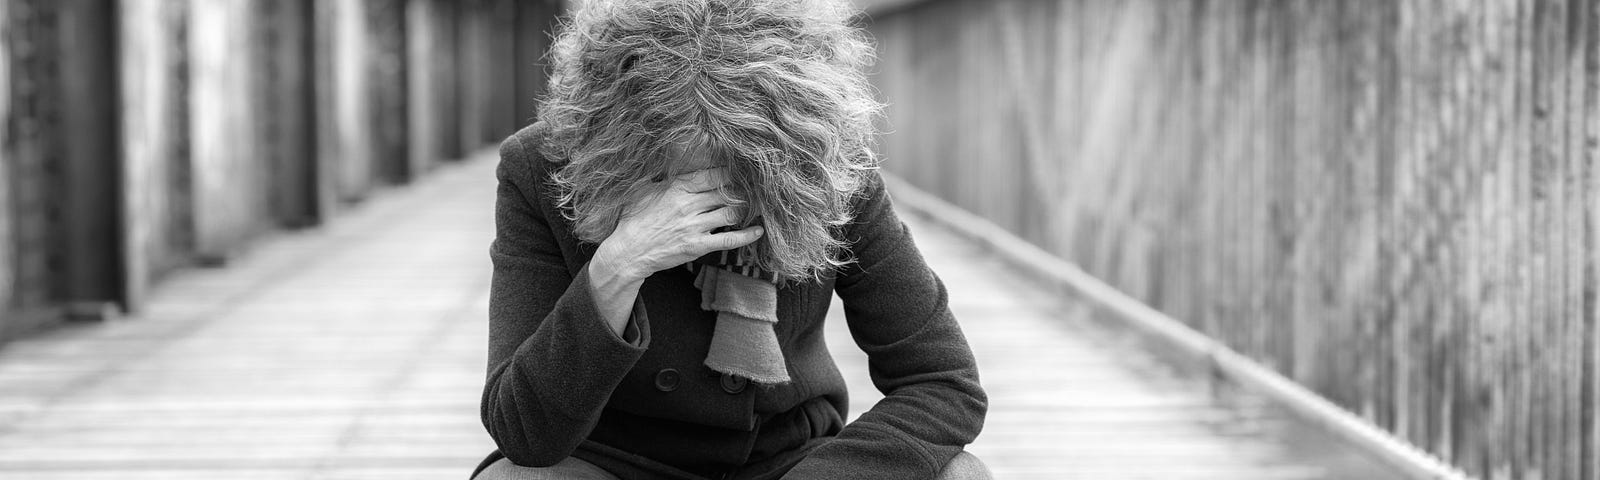 Dejected woman squatting on a bridge hanging her head with hand to her forehead outdoors on a cold day.